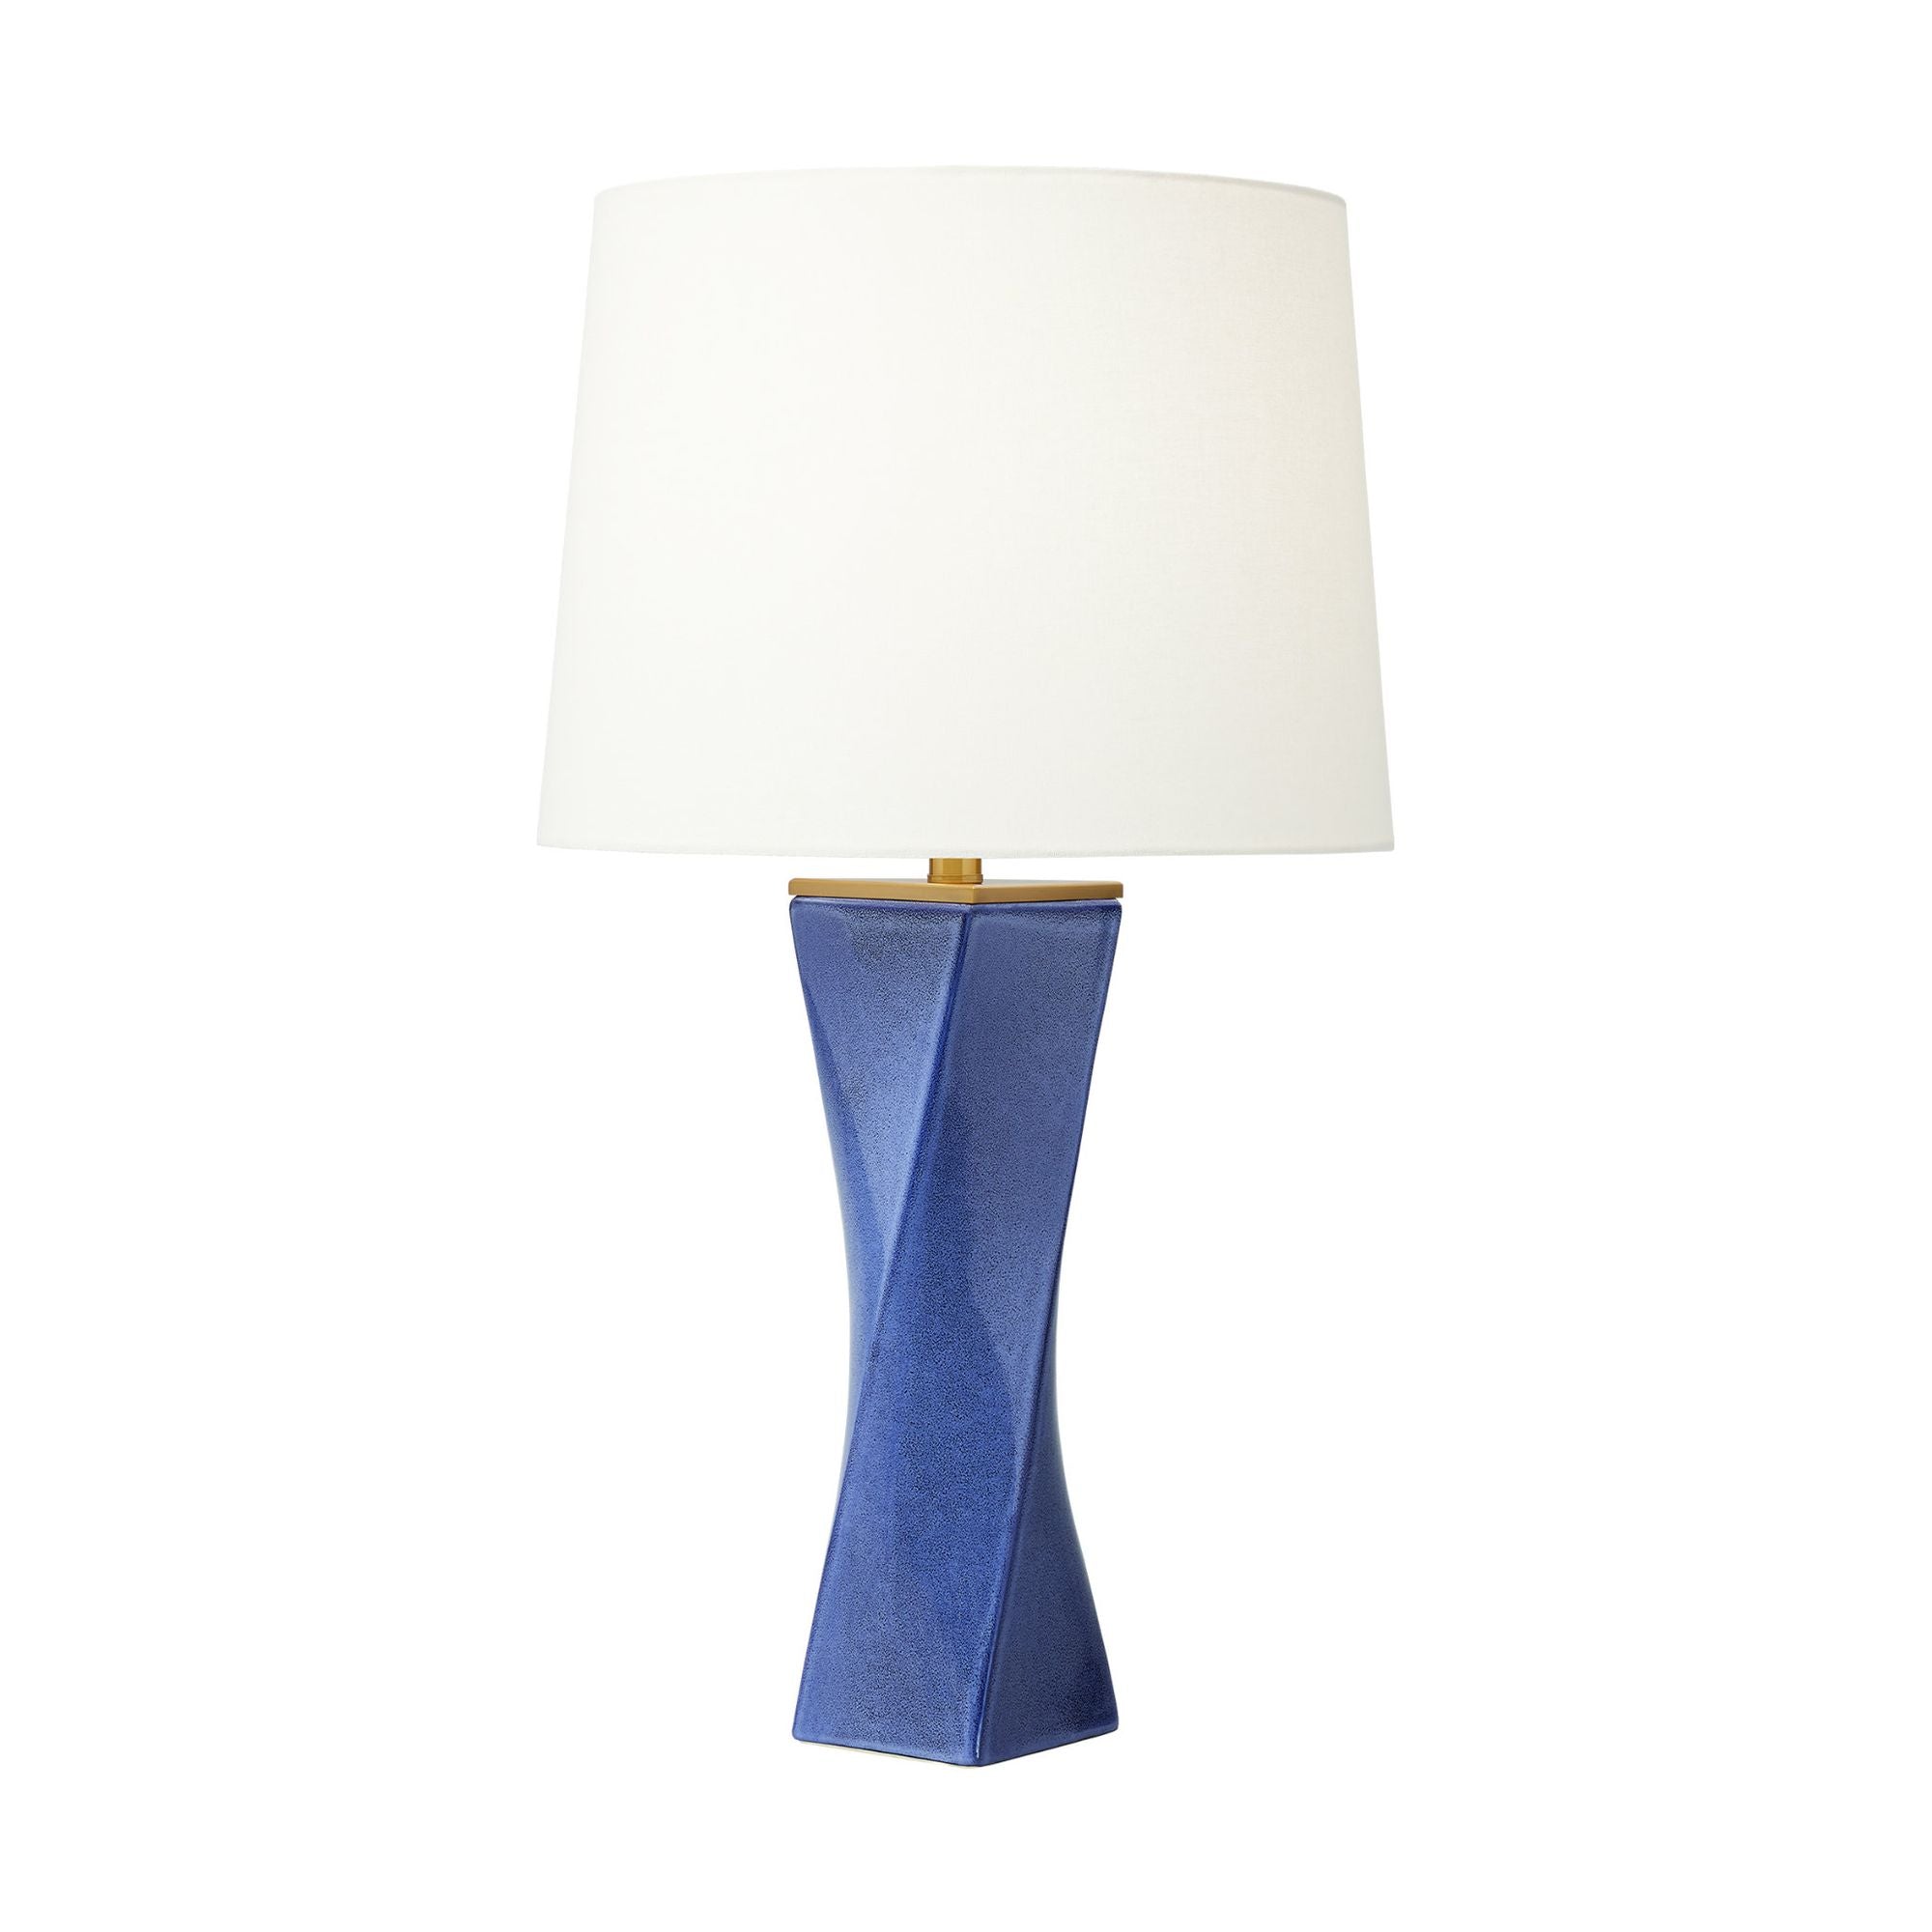 Chapman & Myers Lagos Table Lamp in Frosted Blue